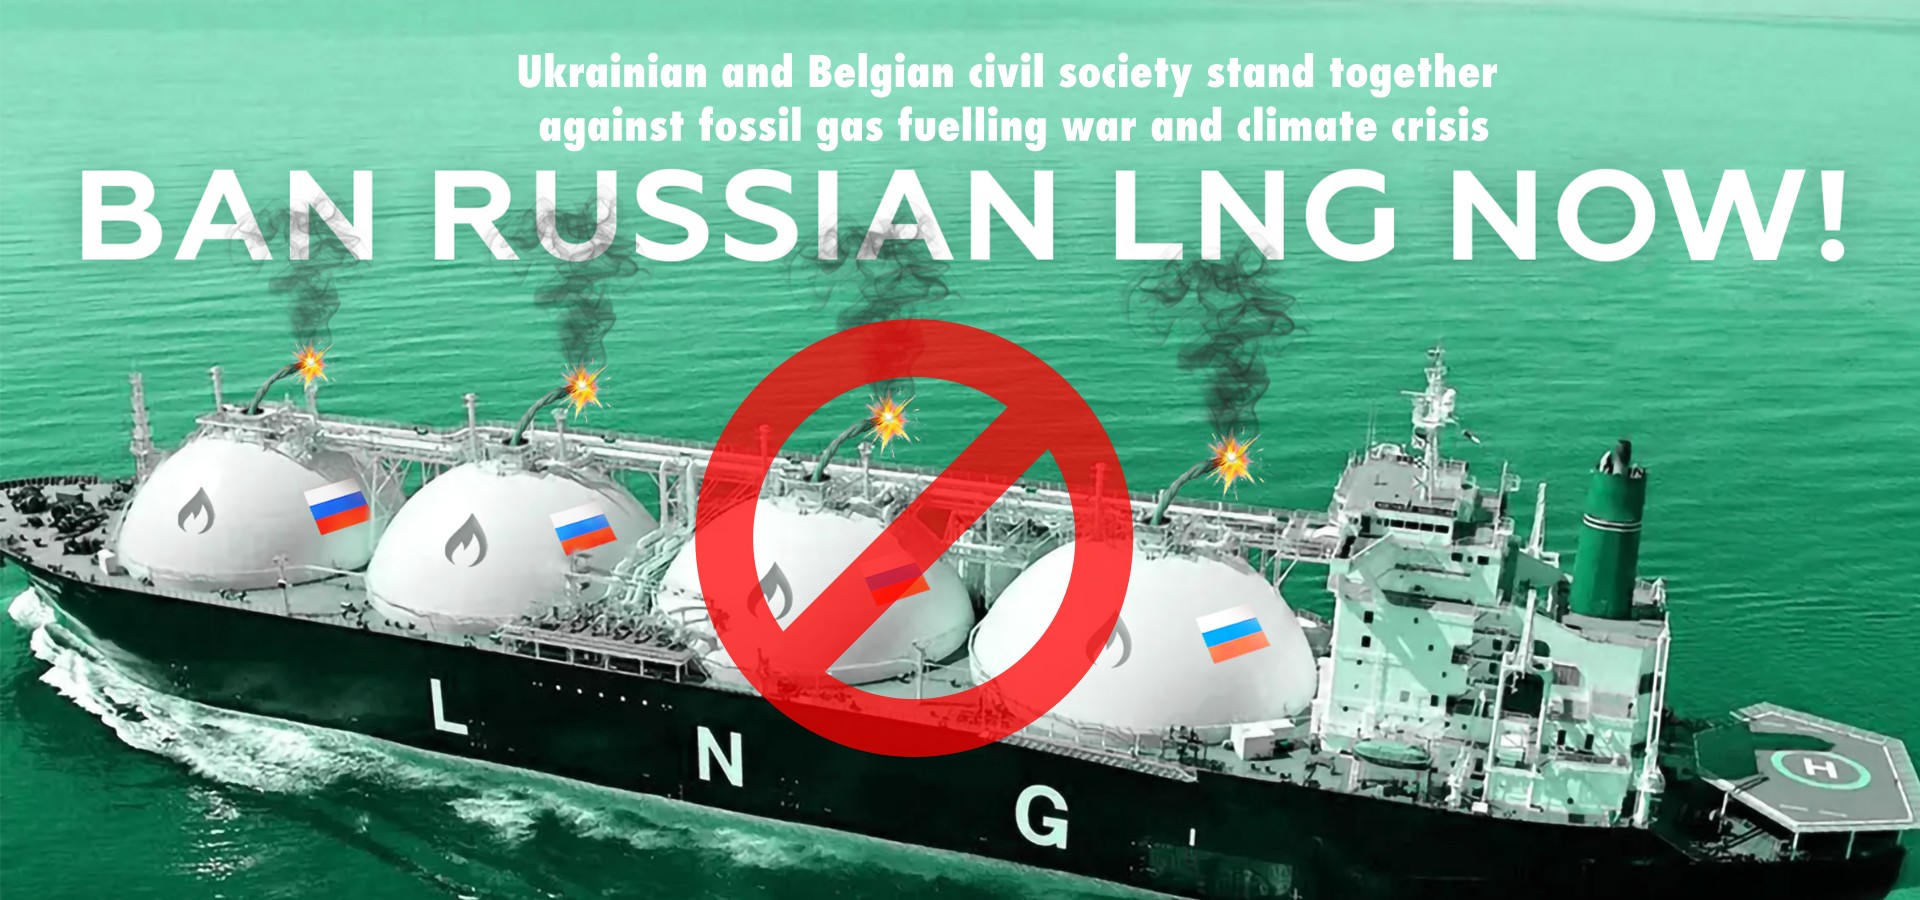 Demonstration 'BAN RUSSIAN LNG NOW!'